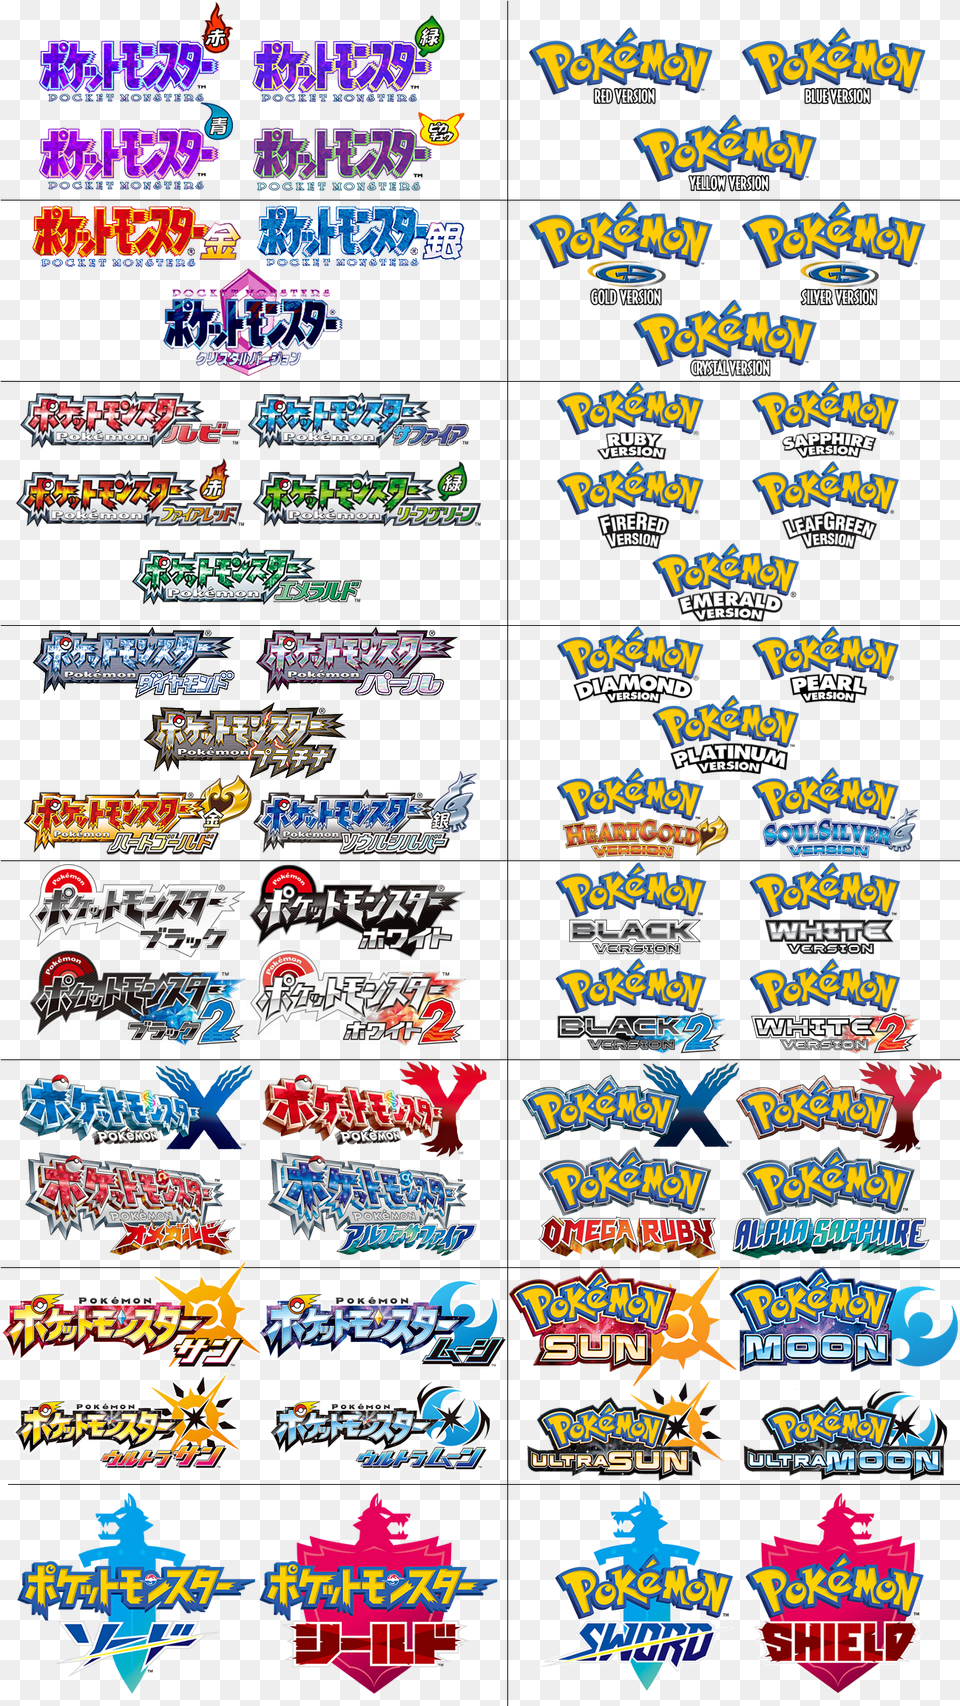 All Pokemon Core Games Logo, Text Png Image